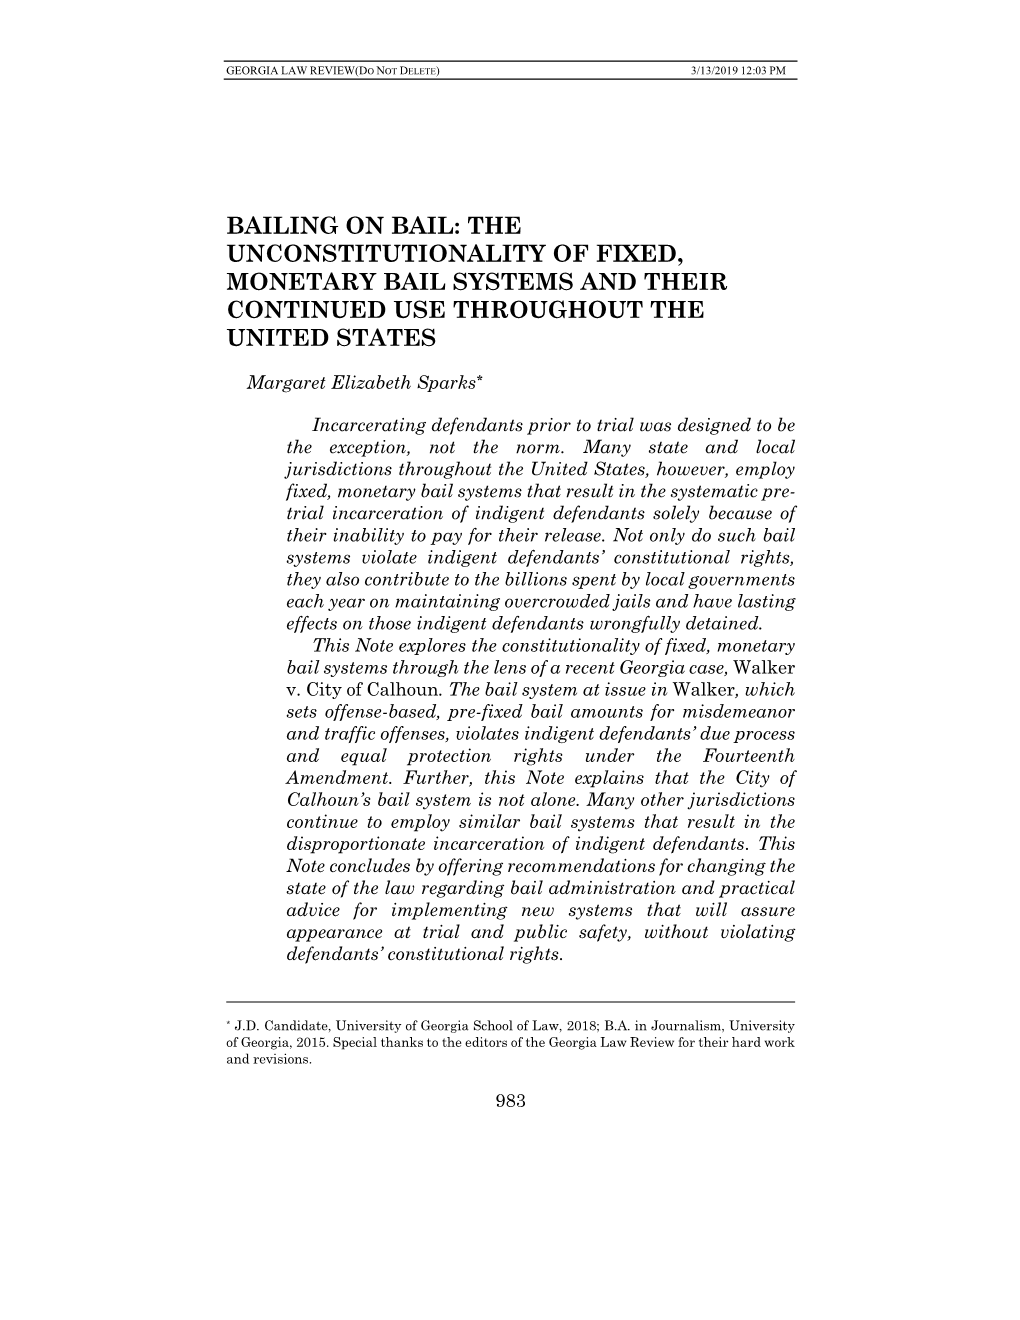 The Unconstitutionality of Fixed, Monetary Bail Systems and Their Continued Use Throughout the United States